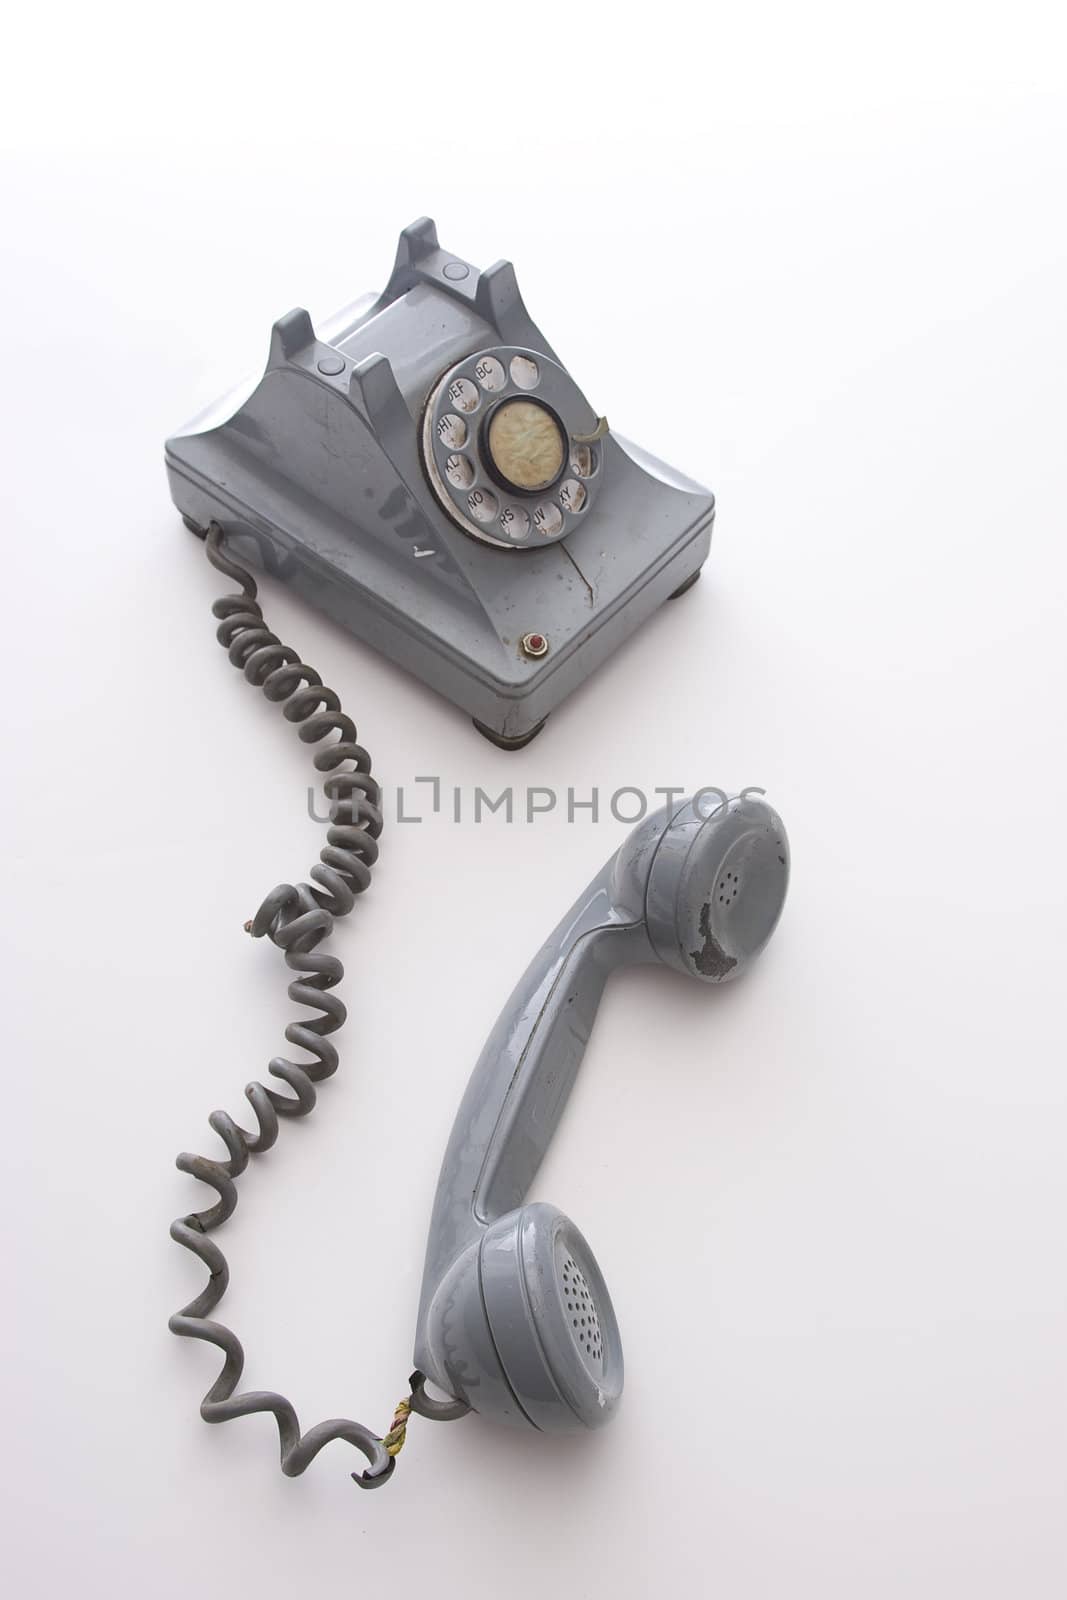 dirty vintage gray rotary phone with crack casing and expose wired, unhooked and left there